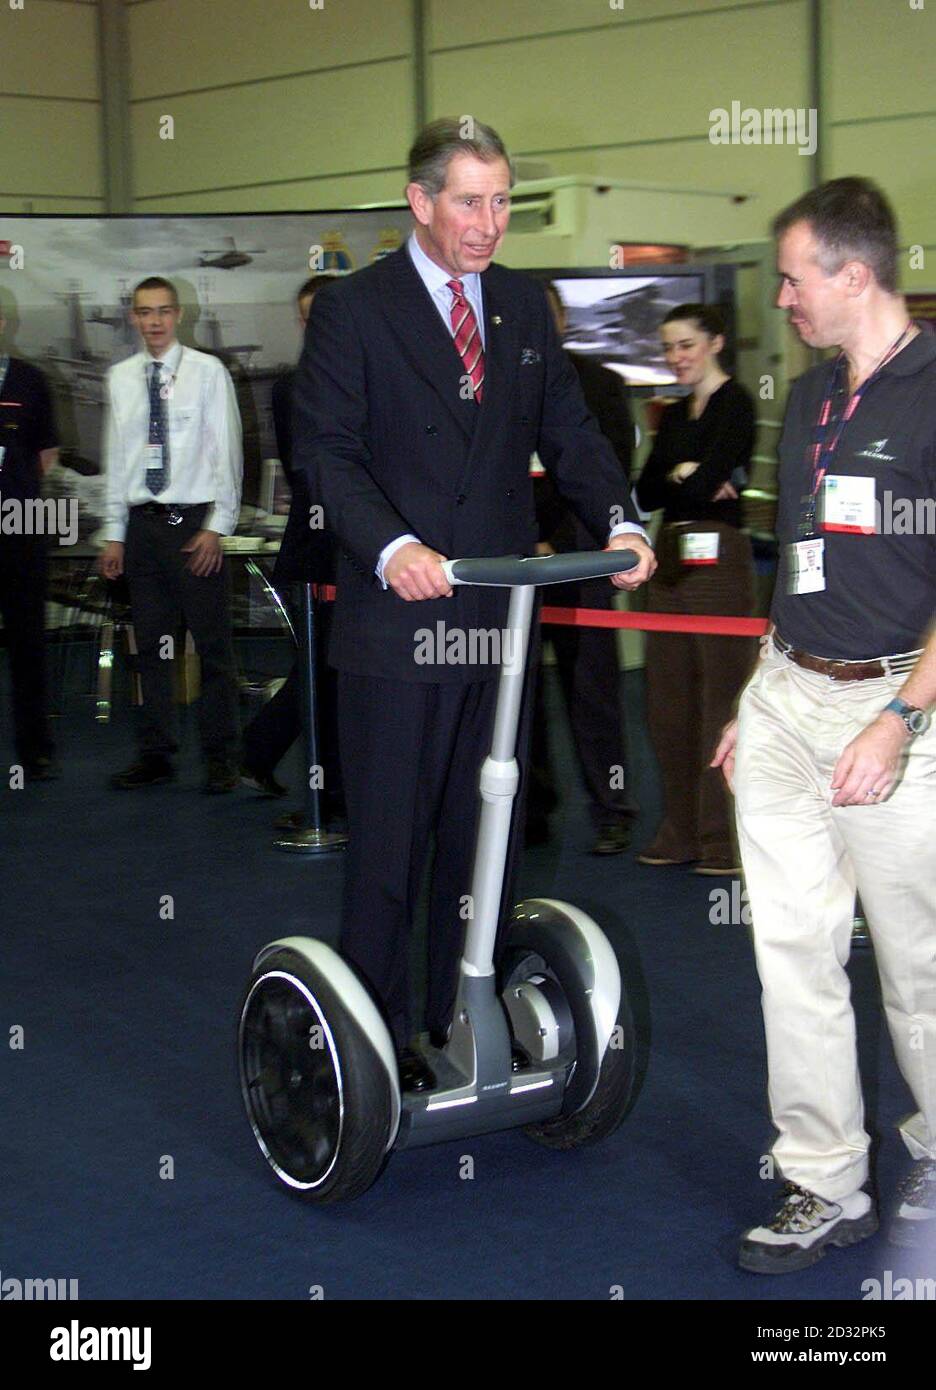 The Prince of Wales, on his 54th birthday, rides on an electrically-powered Segway during a visit to a vocational careers' fair in Salford, Greater Manchester. *..The invention, which looks like an electric scooter, uses a high-tech system of gyroscopes to detect the user's natural sense of balance to steer it. The electrically powered Segway was developed with the help of British firm BAE Systems in an attempt to make getting around urban areas quicker and easier. The invention was being showcased at SkillCity, a joint venture between the Prince's Trust and charity UK Skills aiming to enthu Stock Photo